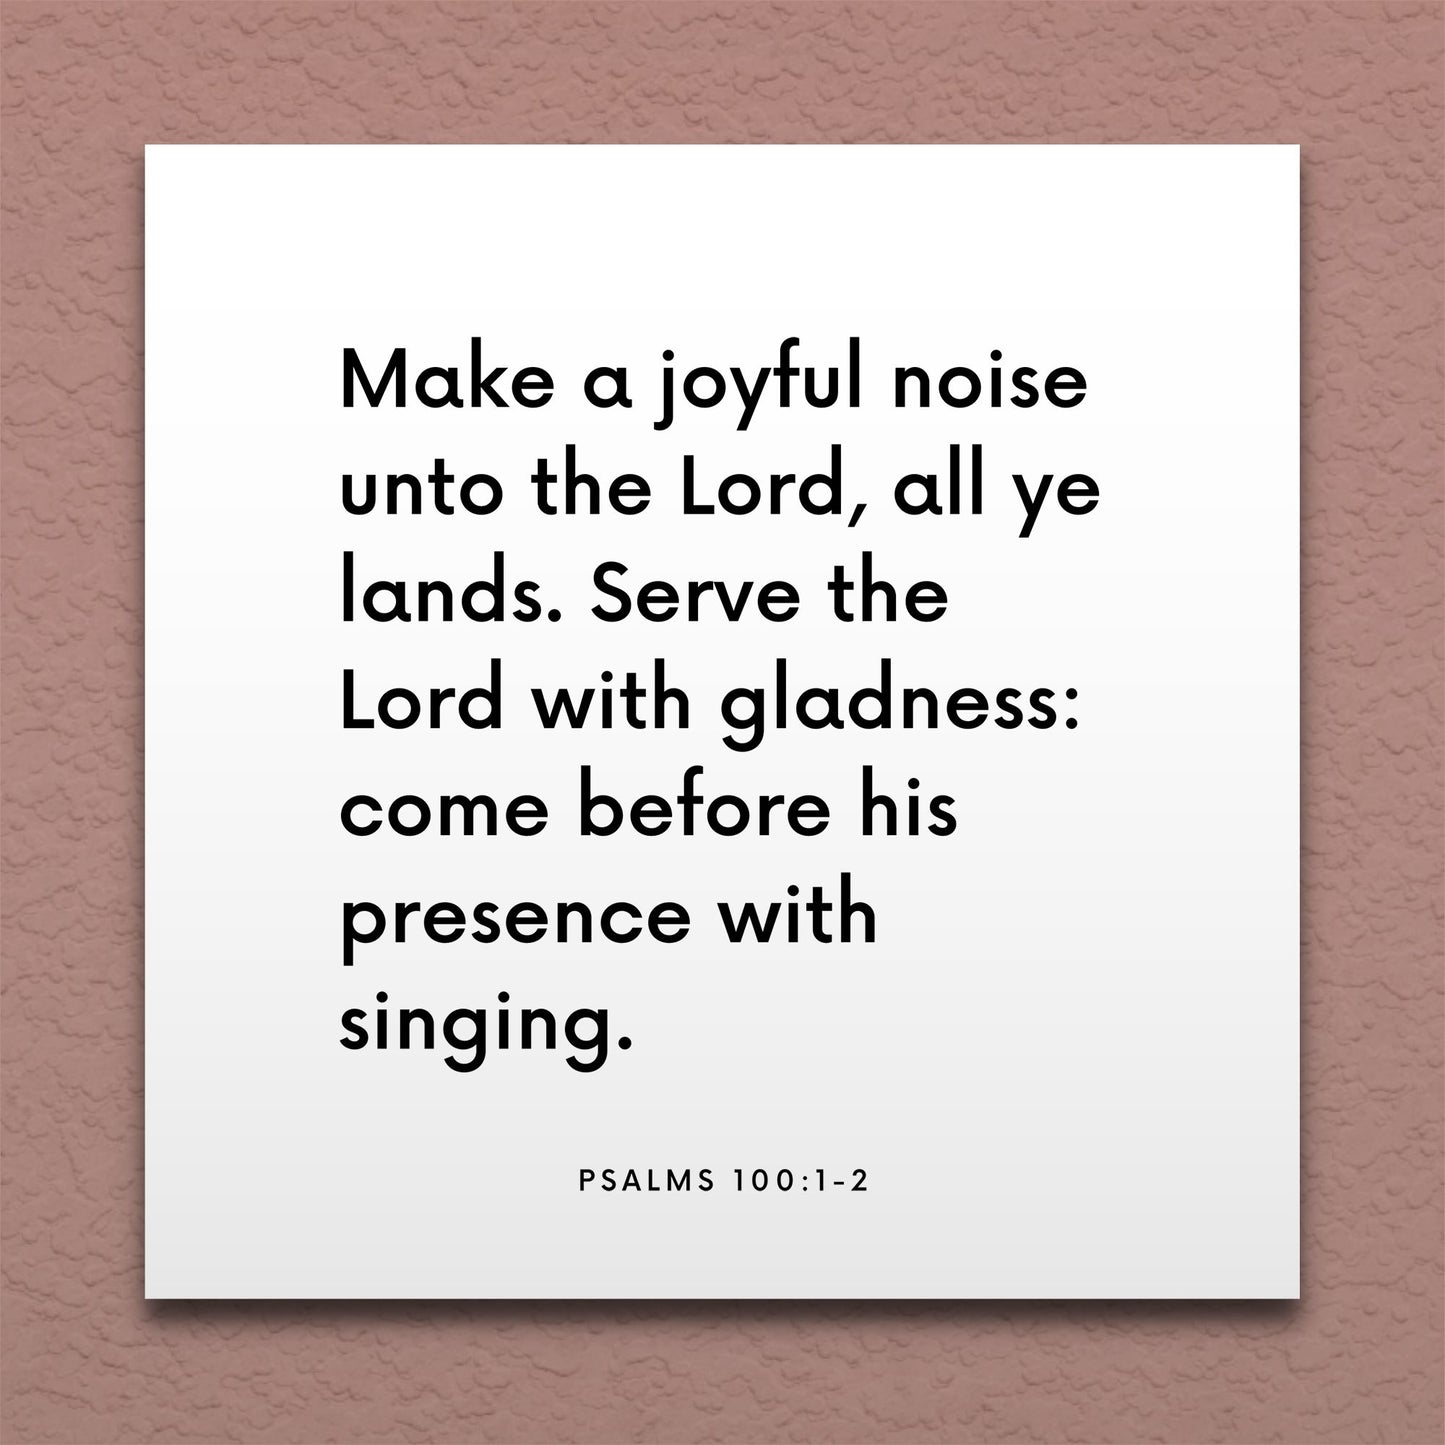 Wall-mounted scripture tile for Psalms 100:1-2 - "Make a joyful noise unto the Lord, all ye lands"